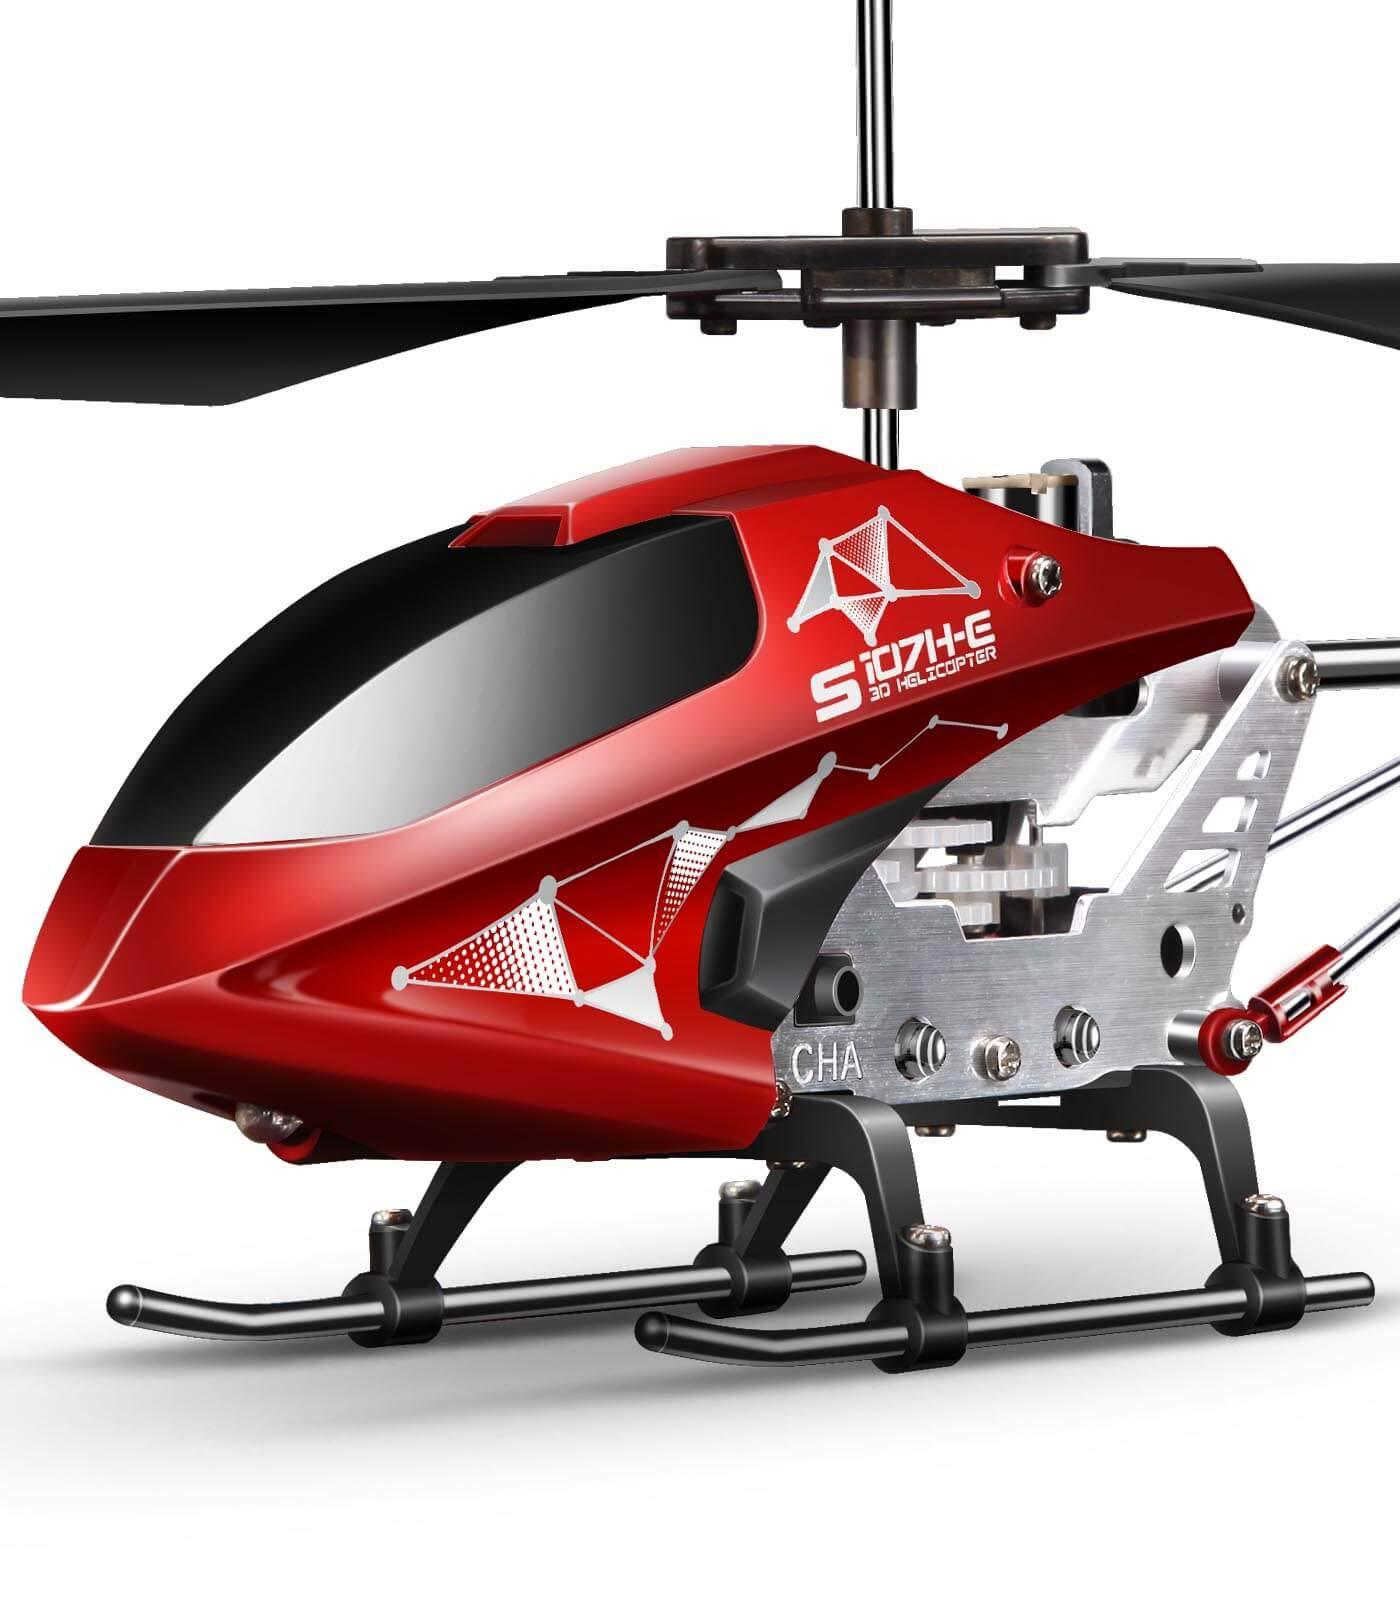 Used Remote Control Helicopters For Sale: Finding used remote control helicopters for sale is easier than you think.